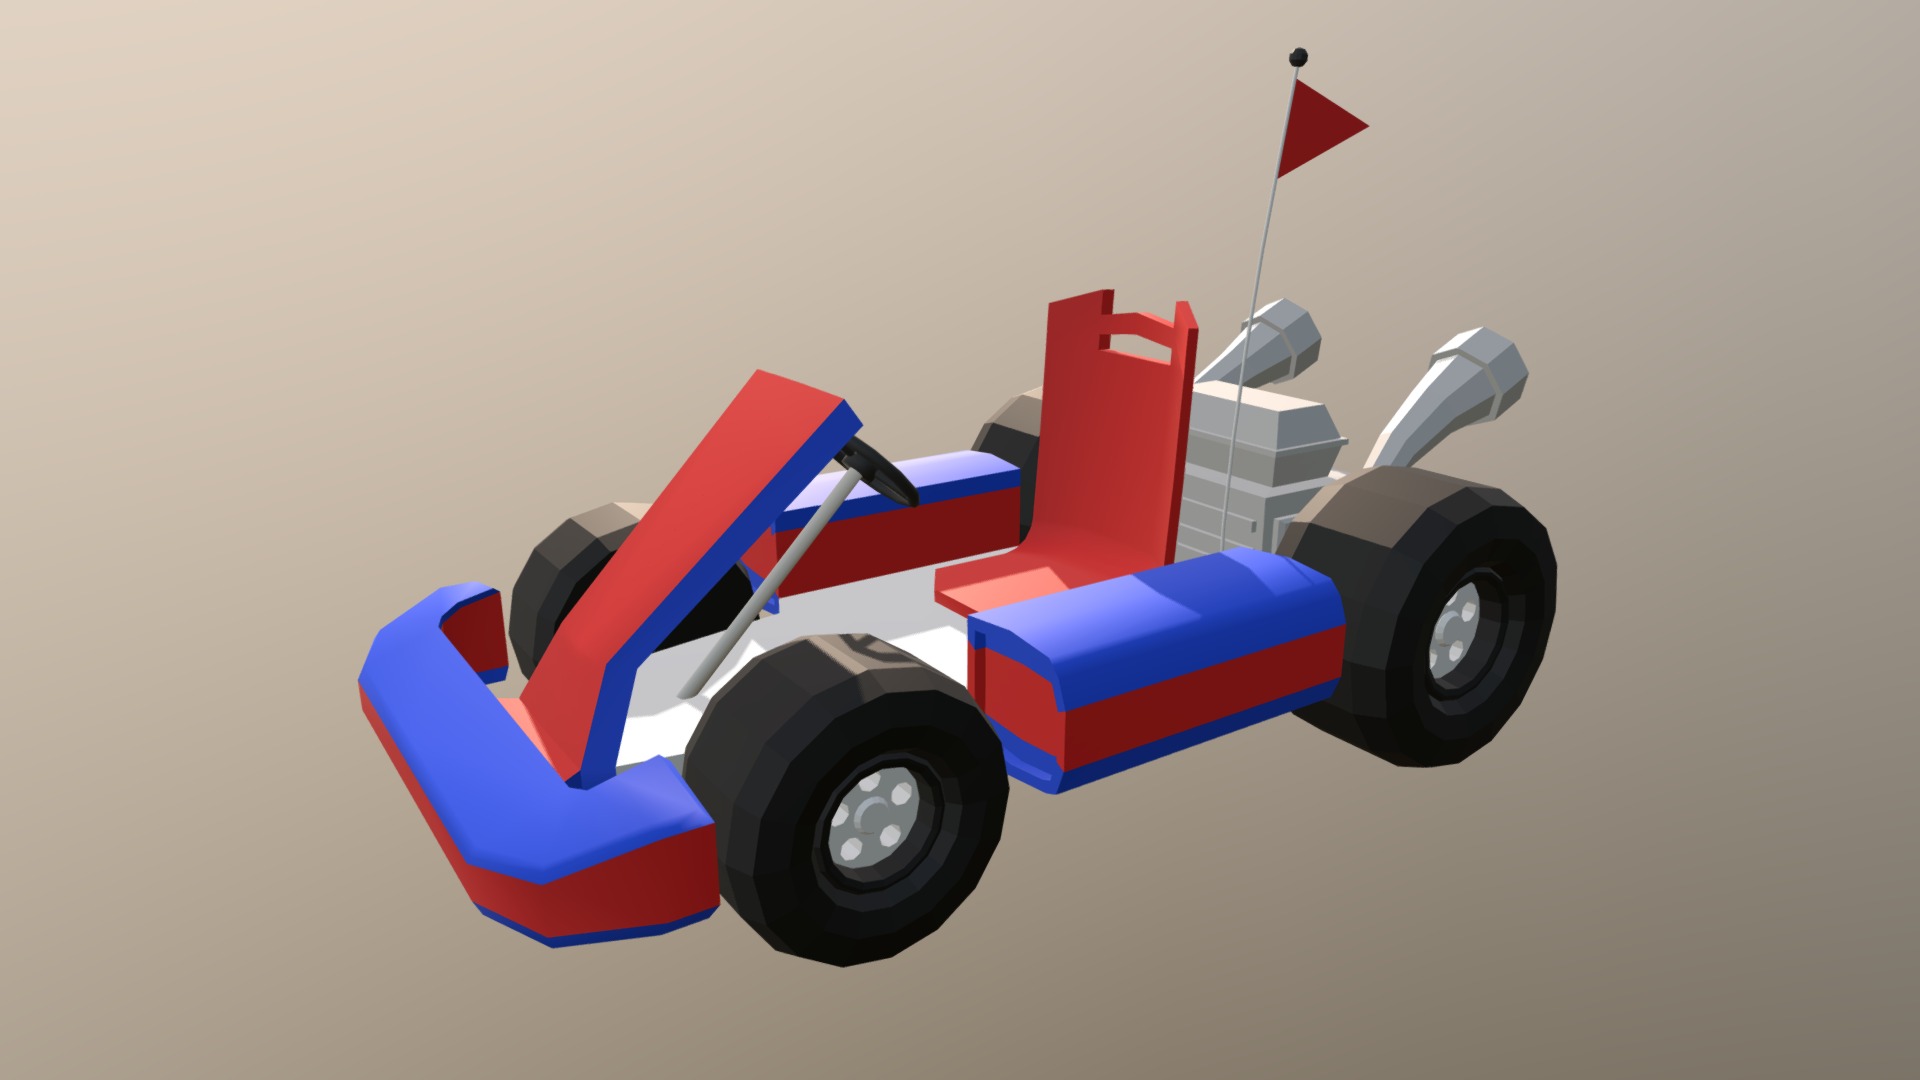 3D model Mini Kart – Low Poly - This is a 3D model of the Mini Kart - Low Poly. The 3D model is about a toy car with a flag.